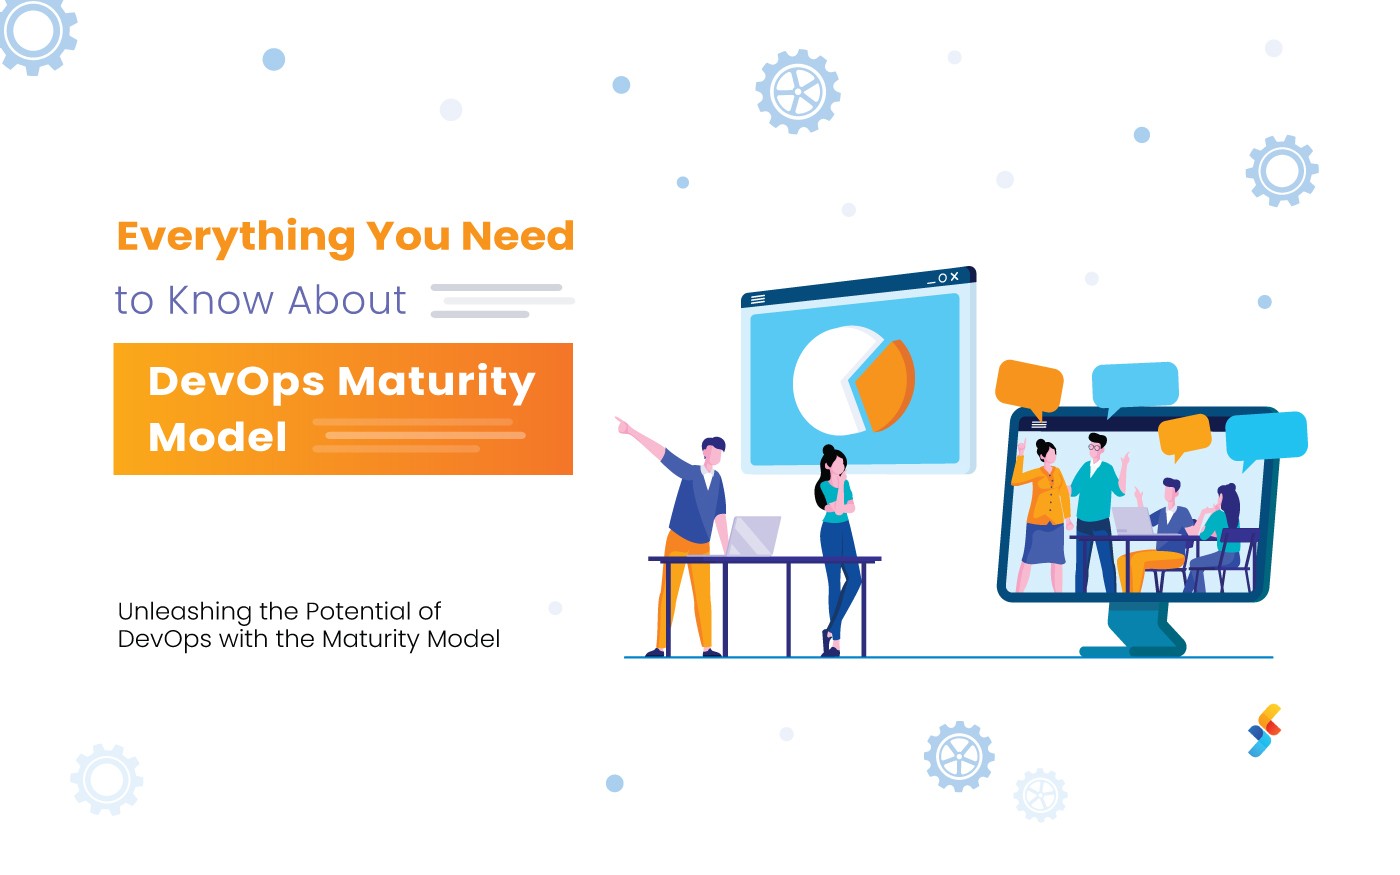 Everything You Need to Know About DevOps Maturity Model